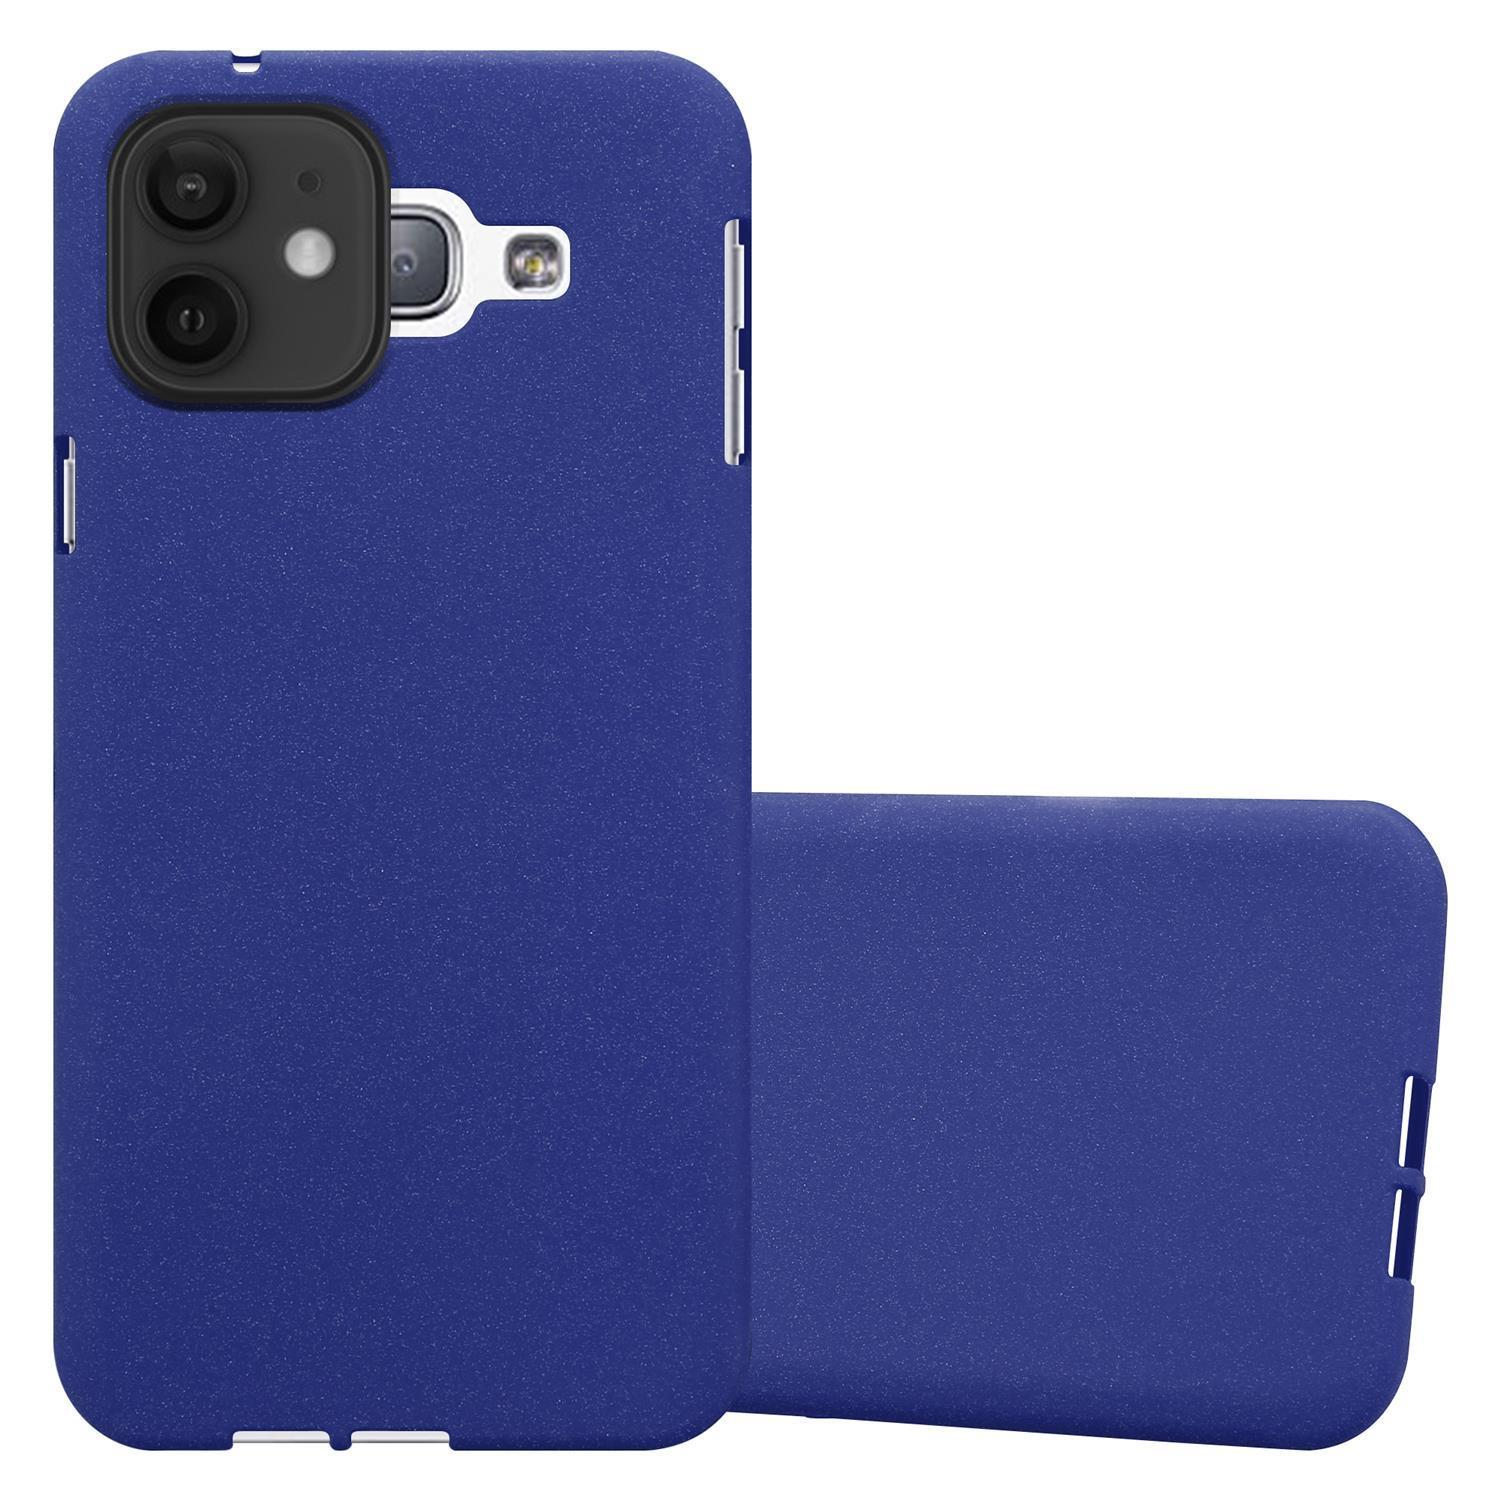 Apple, BLAU MAX, PRO iPhone CADORABO FROST Frosted Schutzhülle, 12 TPU DUNKEL Backcover,